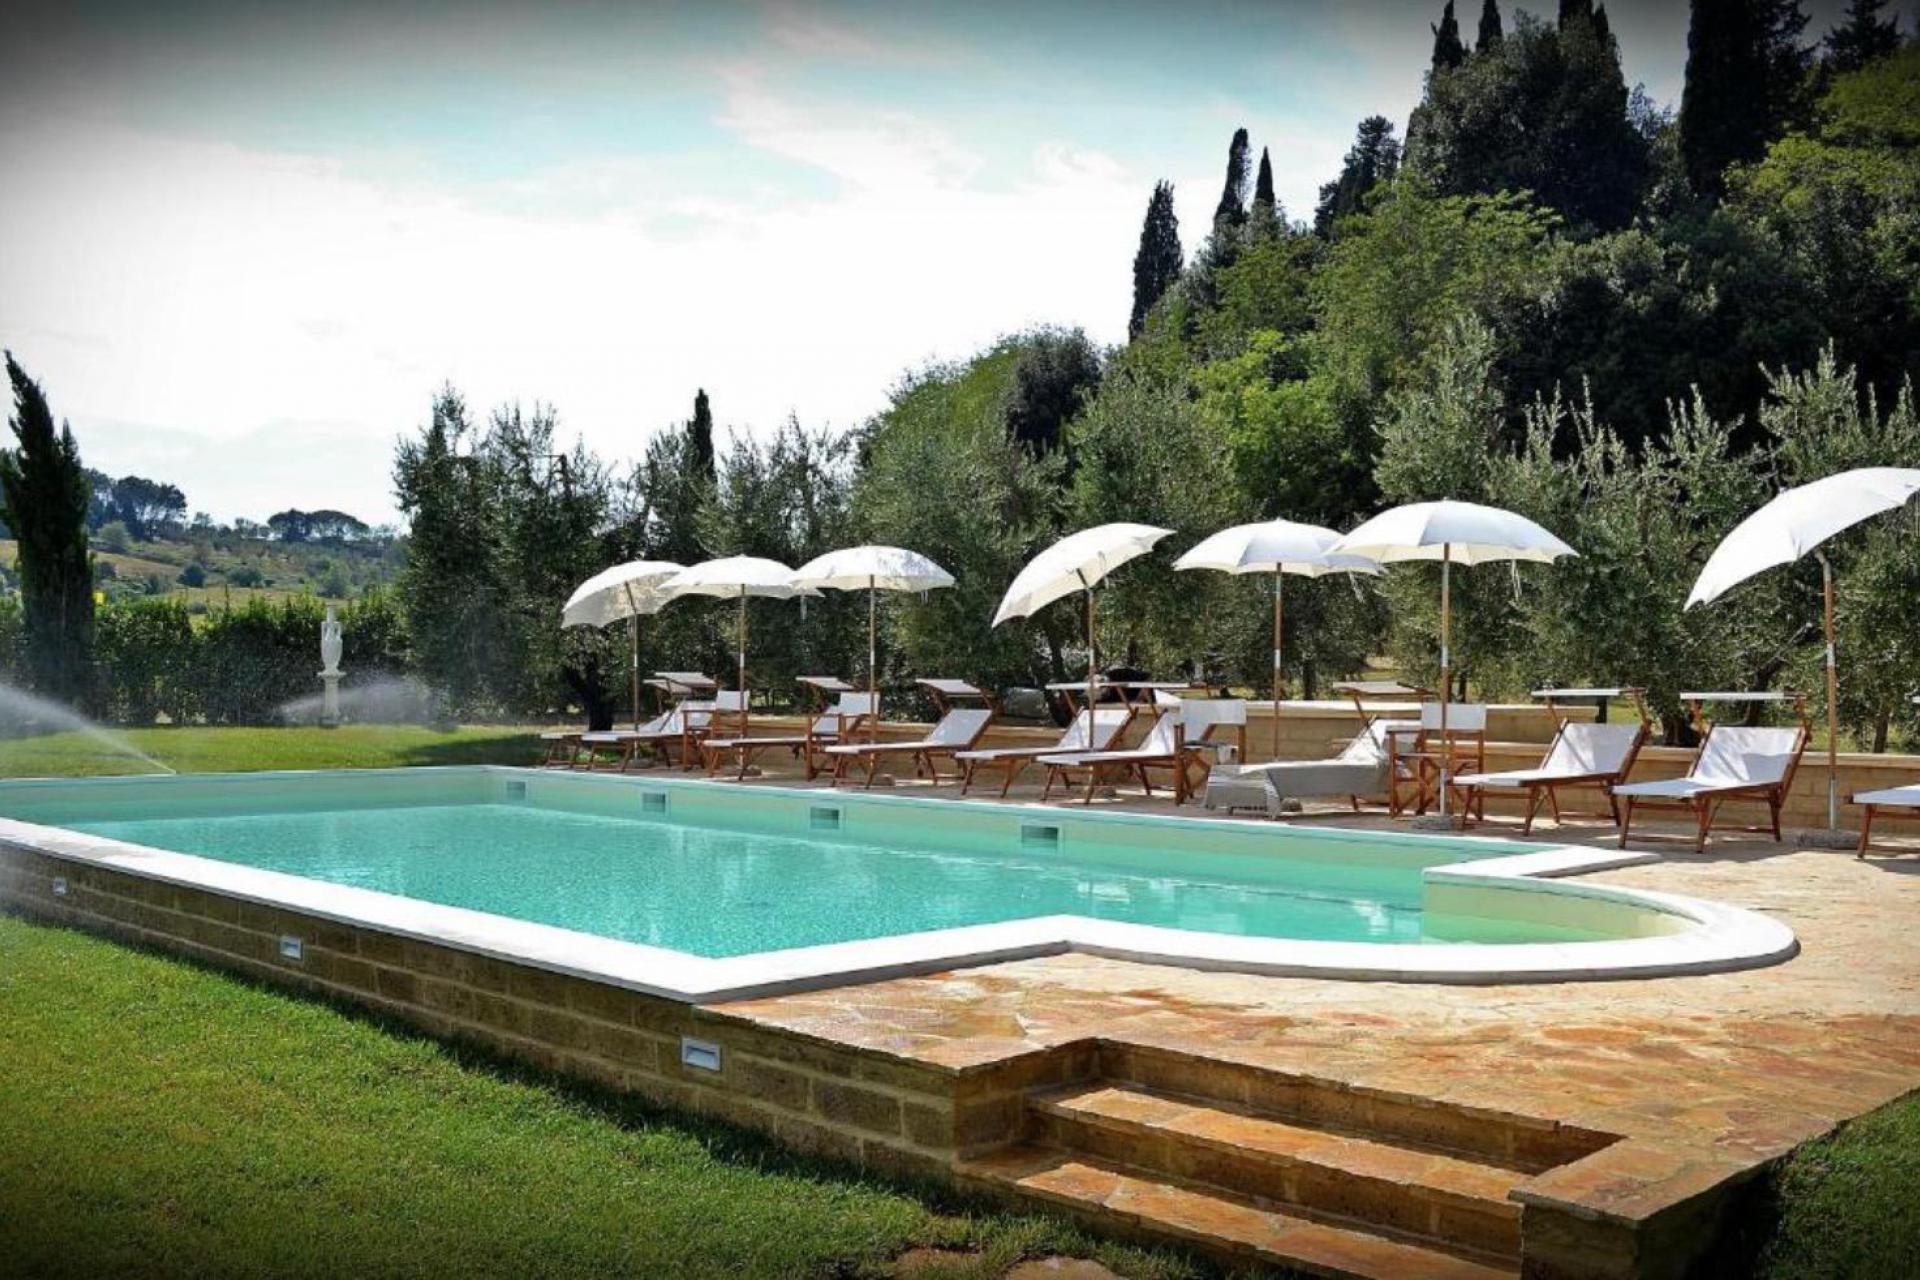 Agriturismo in Tuscany with attractive family-apartments